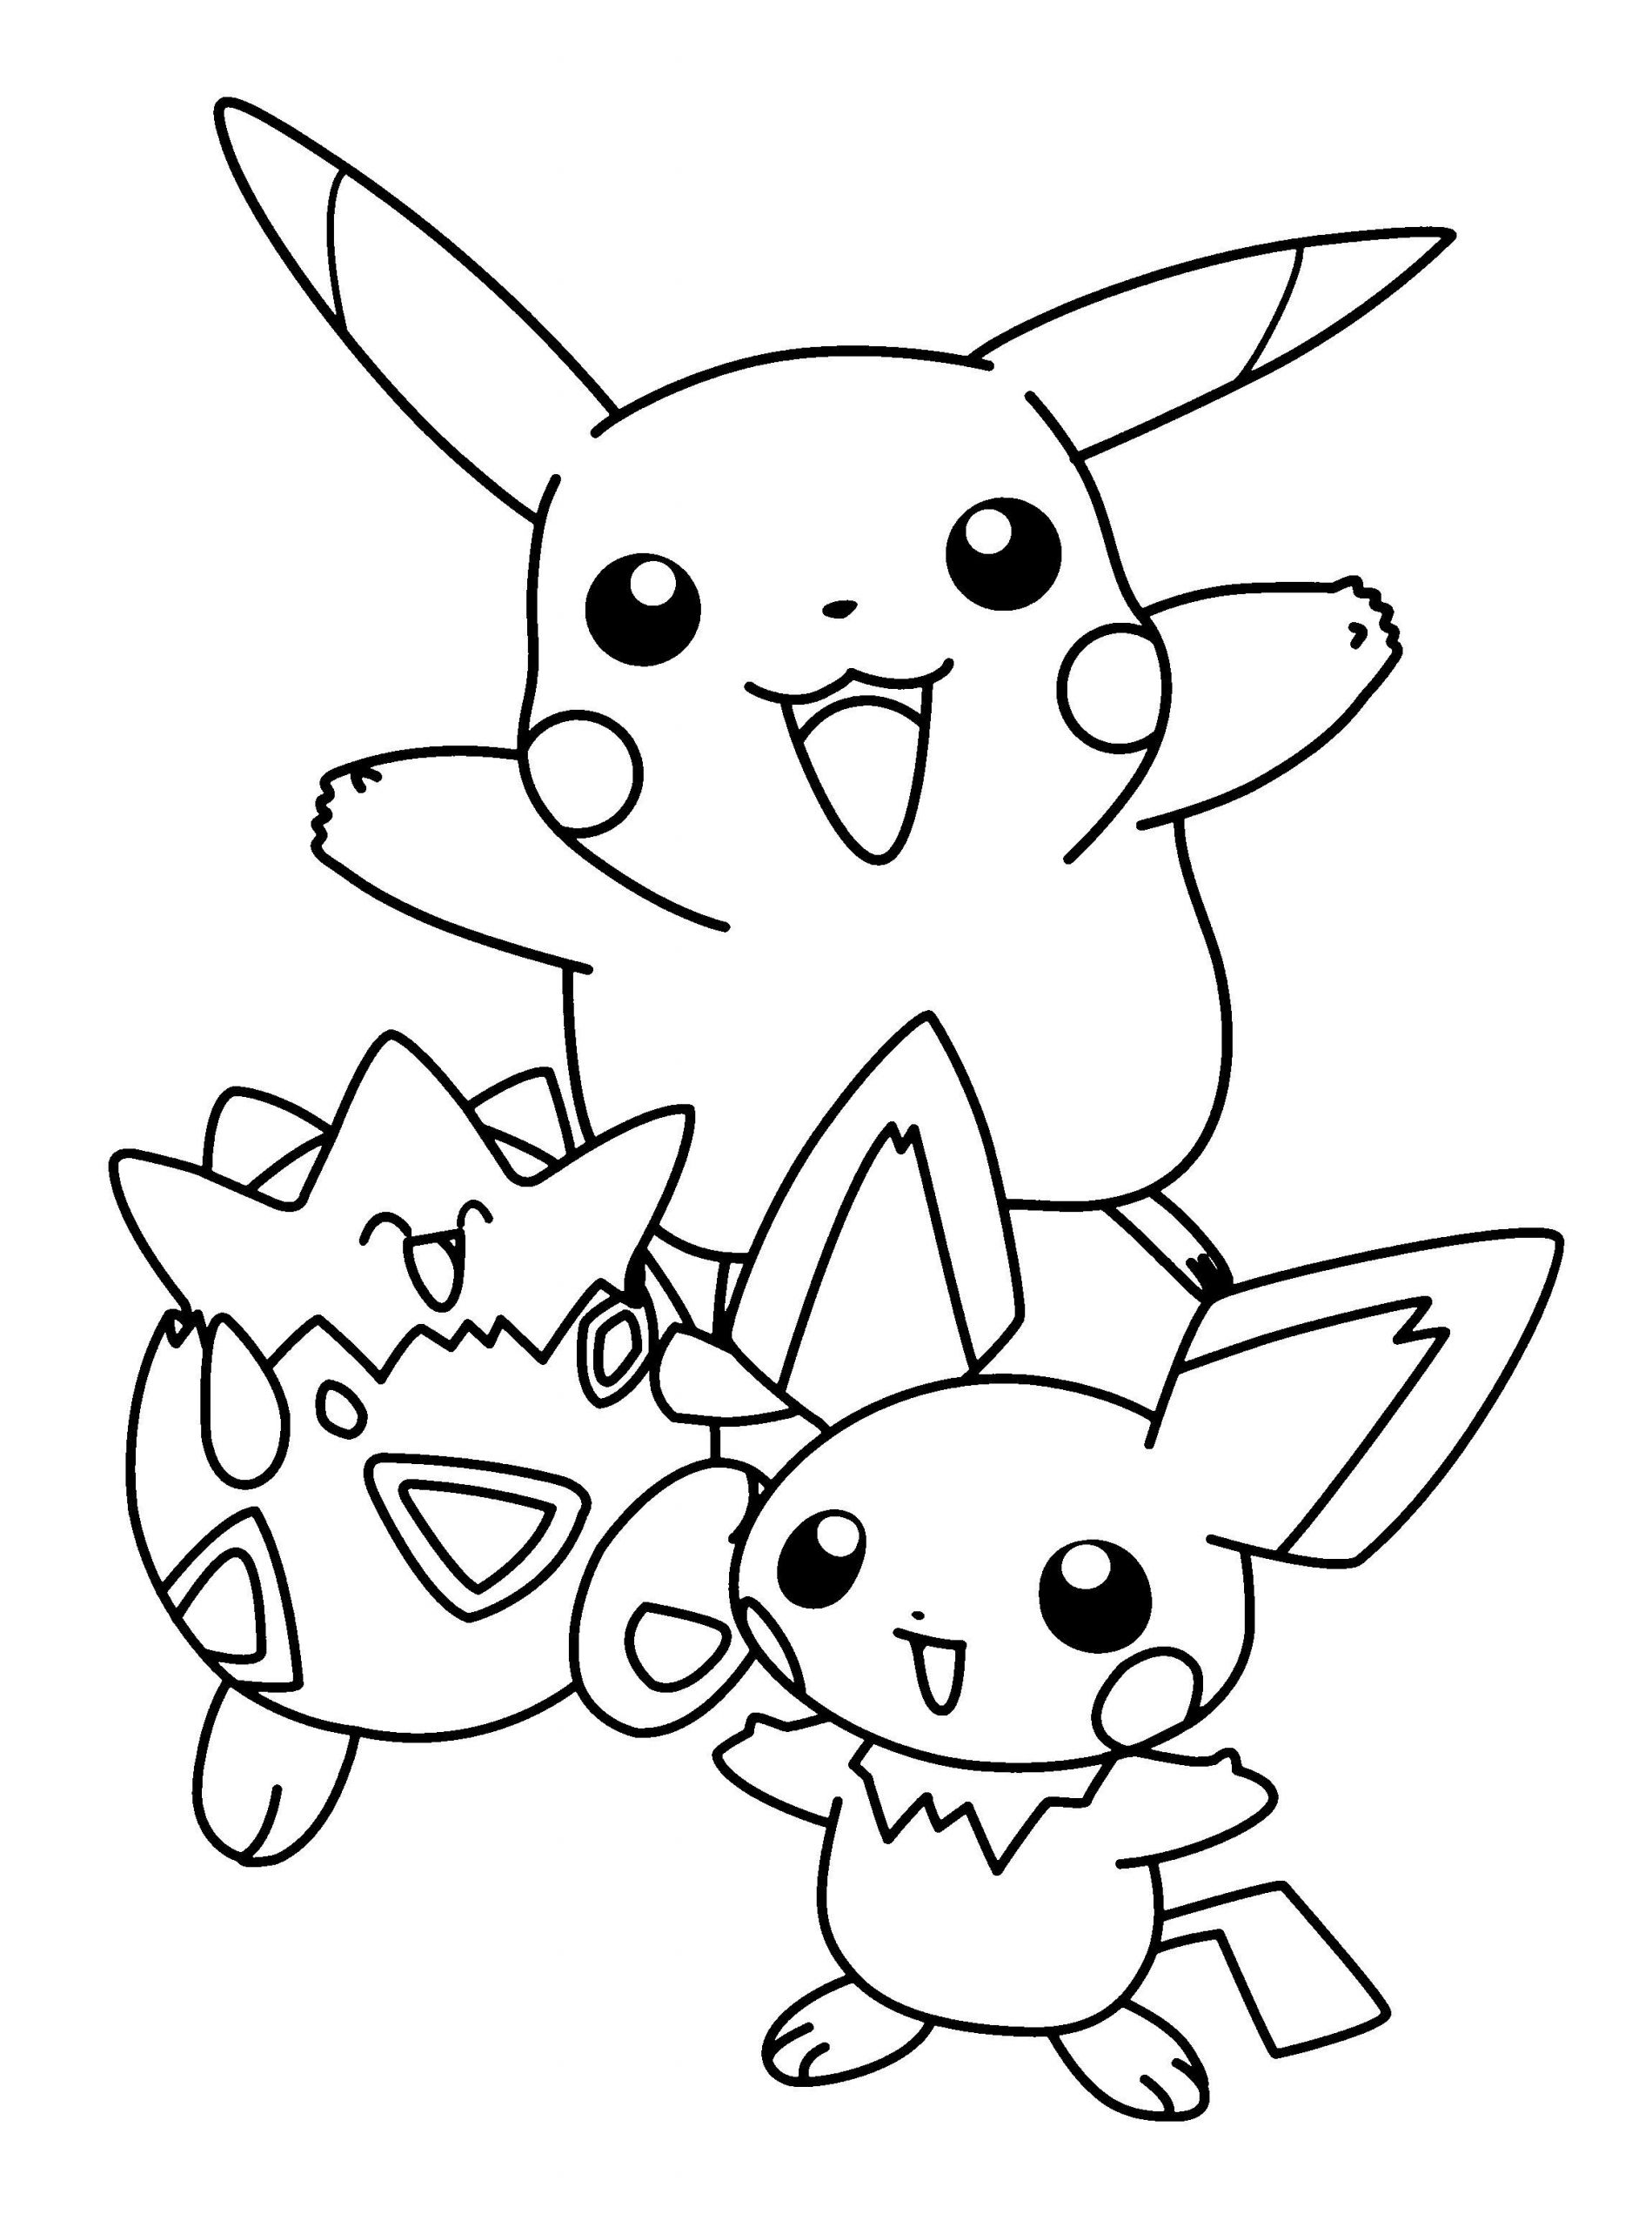 Coloring Pages For Boys Pokemon
 Pokemon Coloring Pages Free Download procoloring